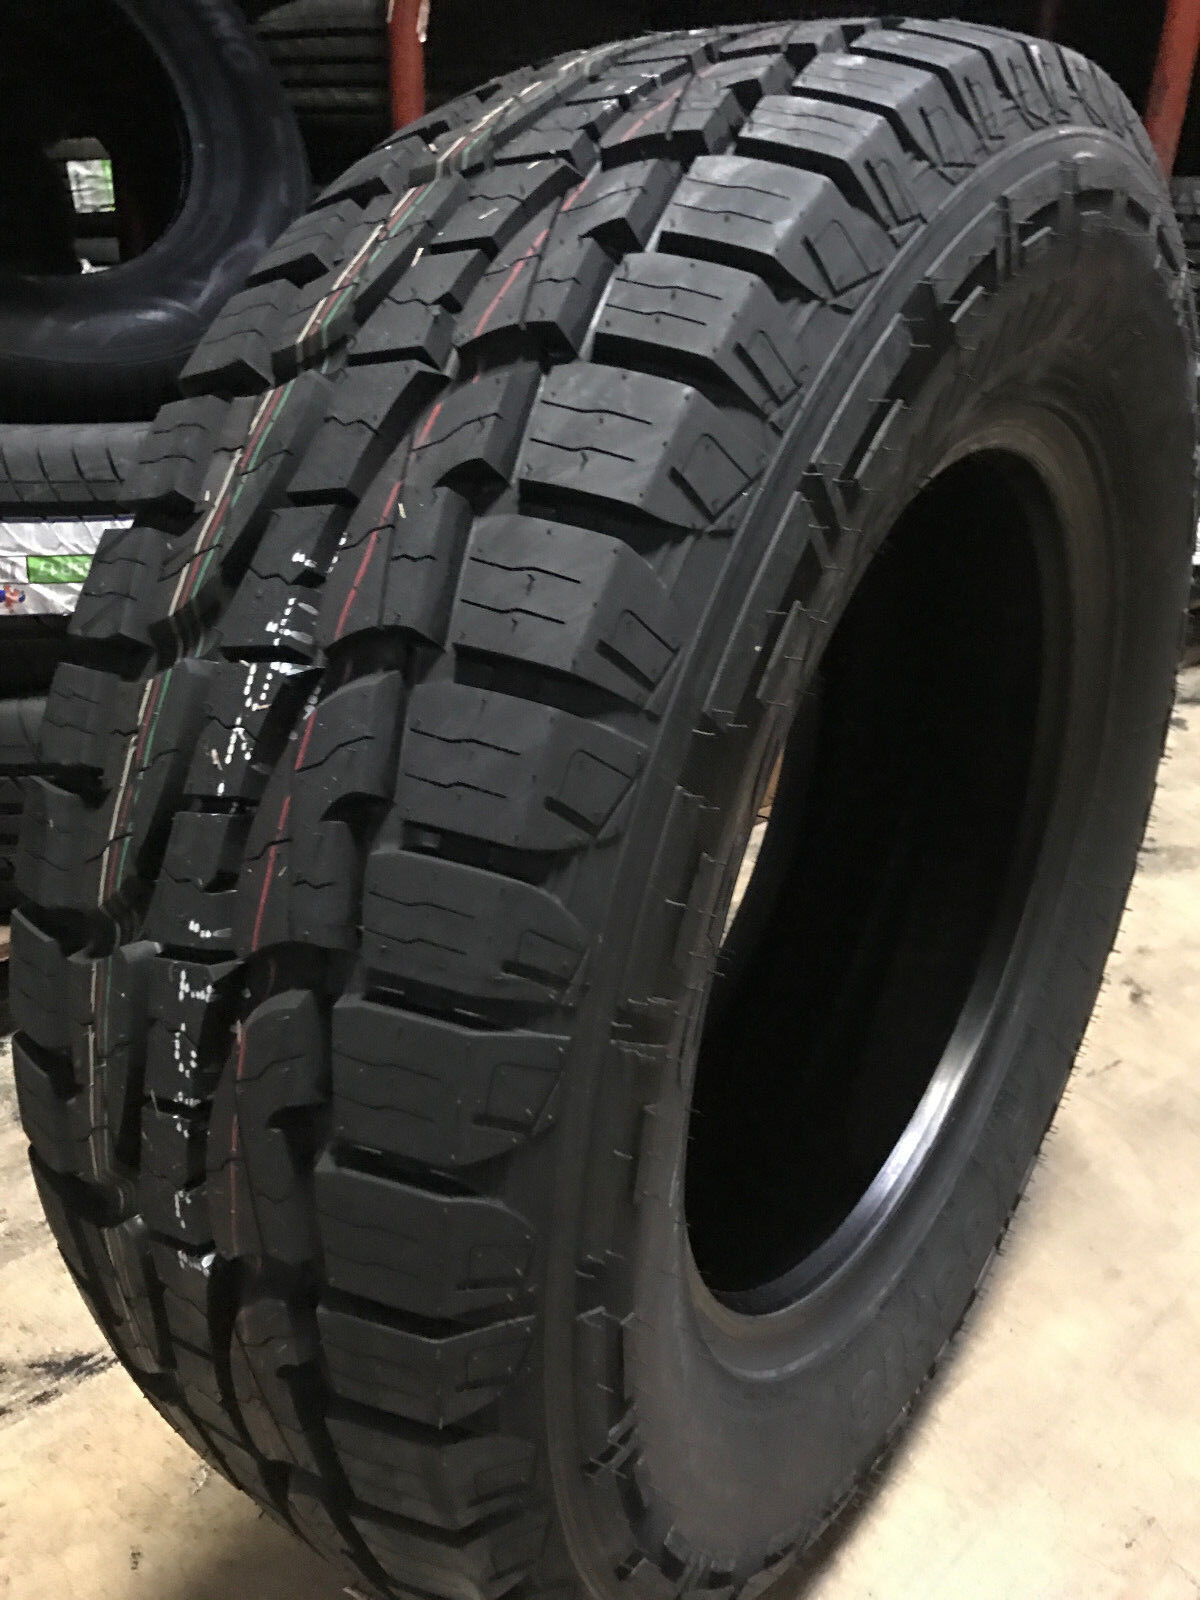 4 NEW 235/80R17 Crosswind A/T Tires 235 80 17 2358017 R17 AT 10 ply All Terrain